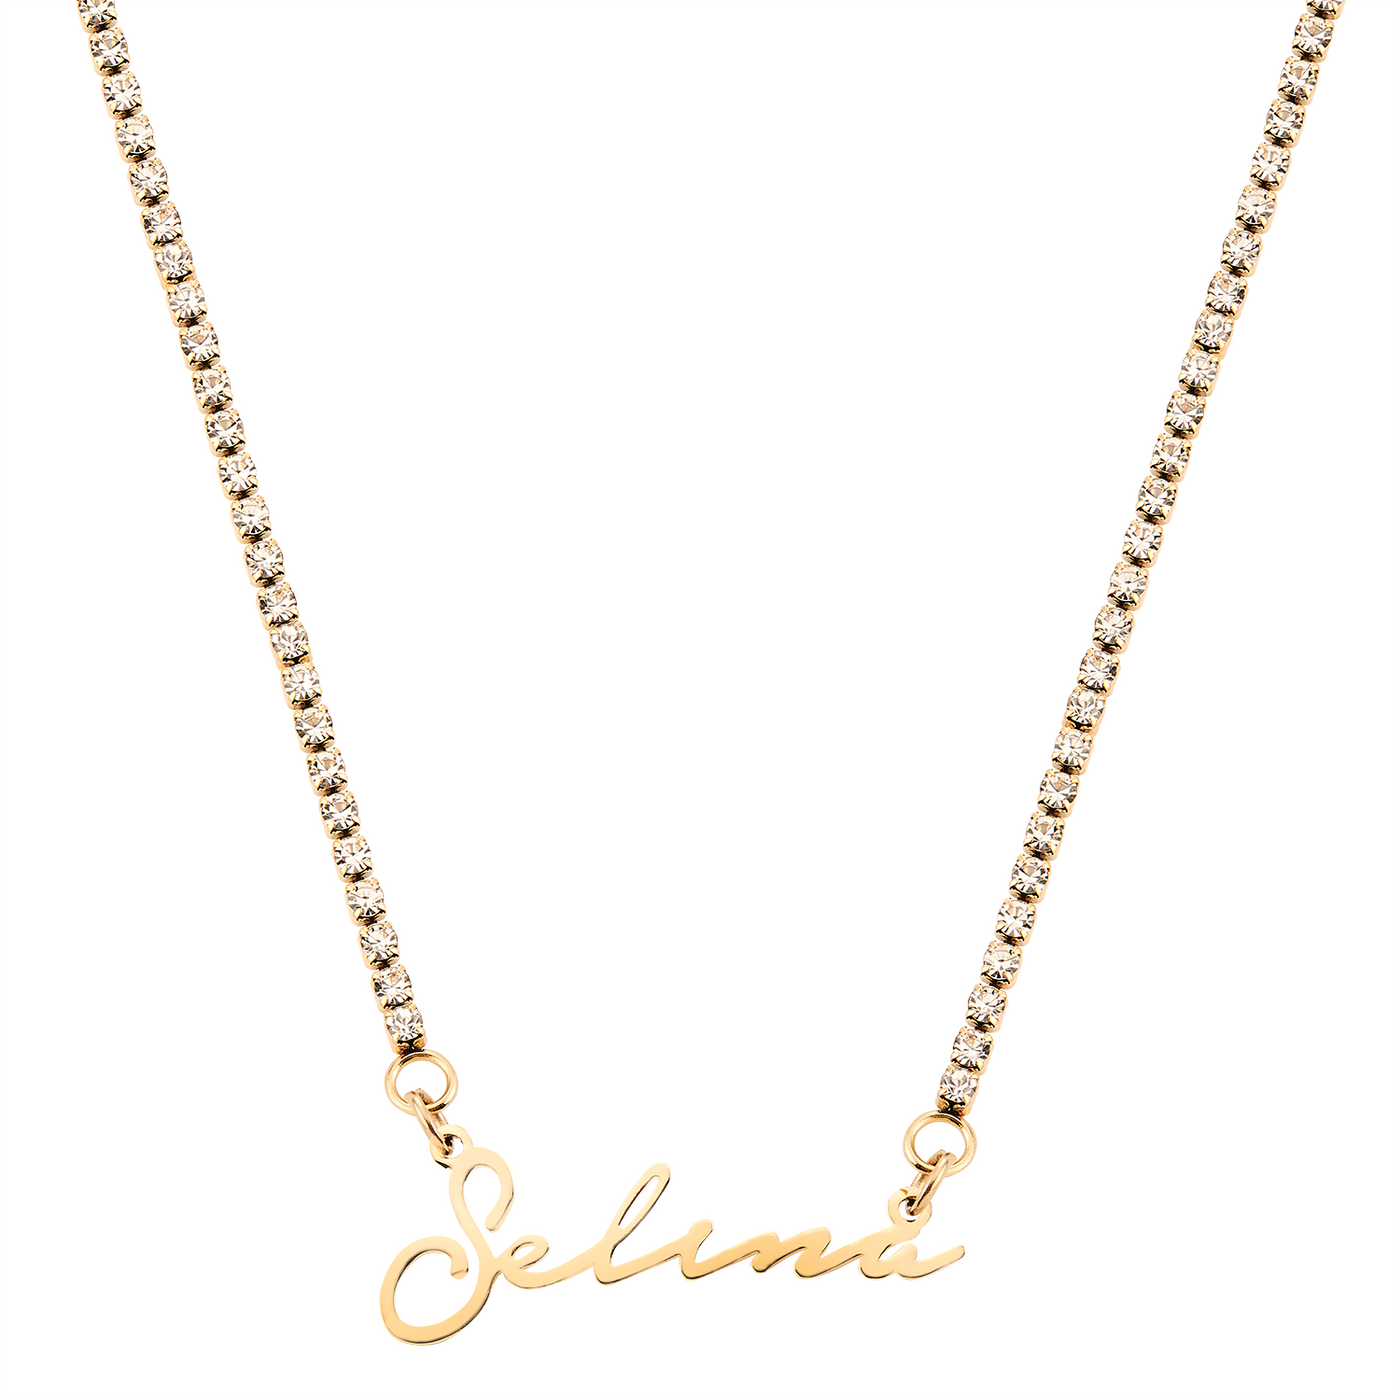 Iced name necklace